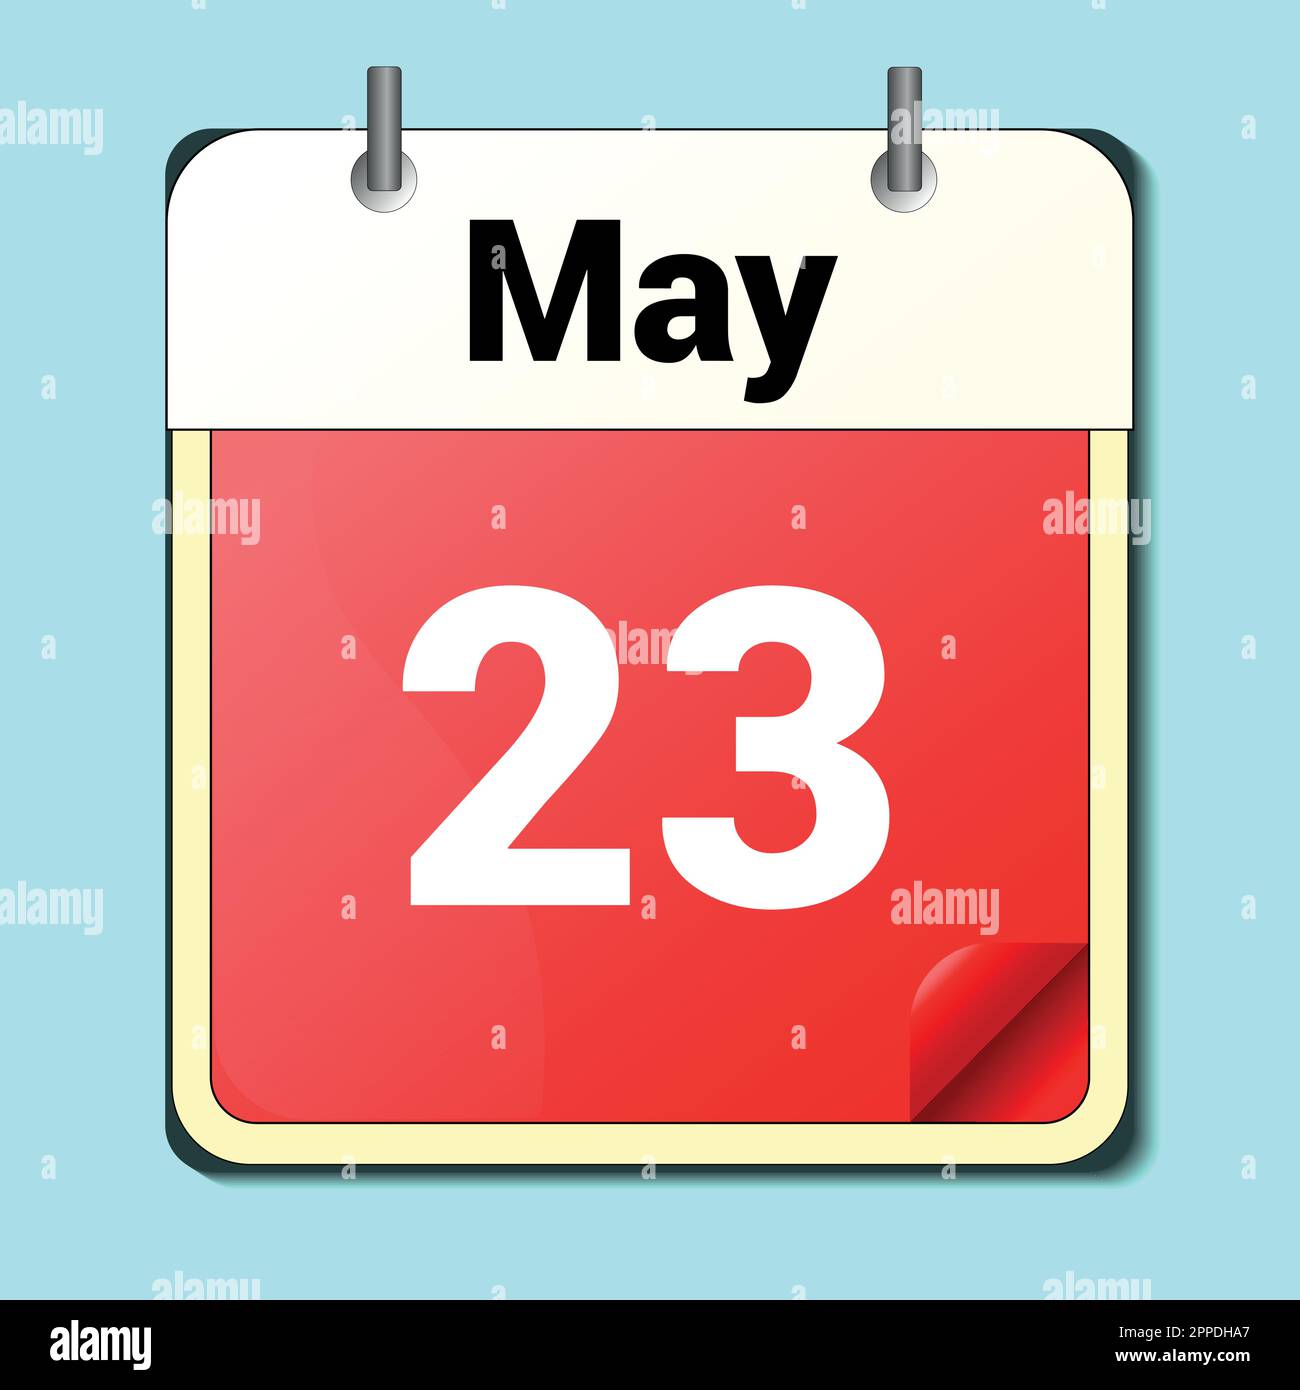 day on the calendar, vector image format, May 23. Stock Vector